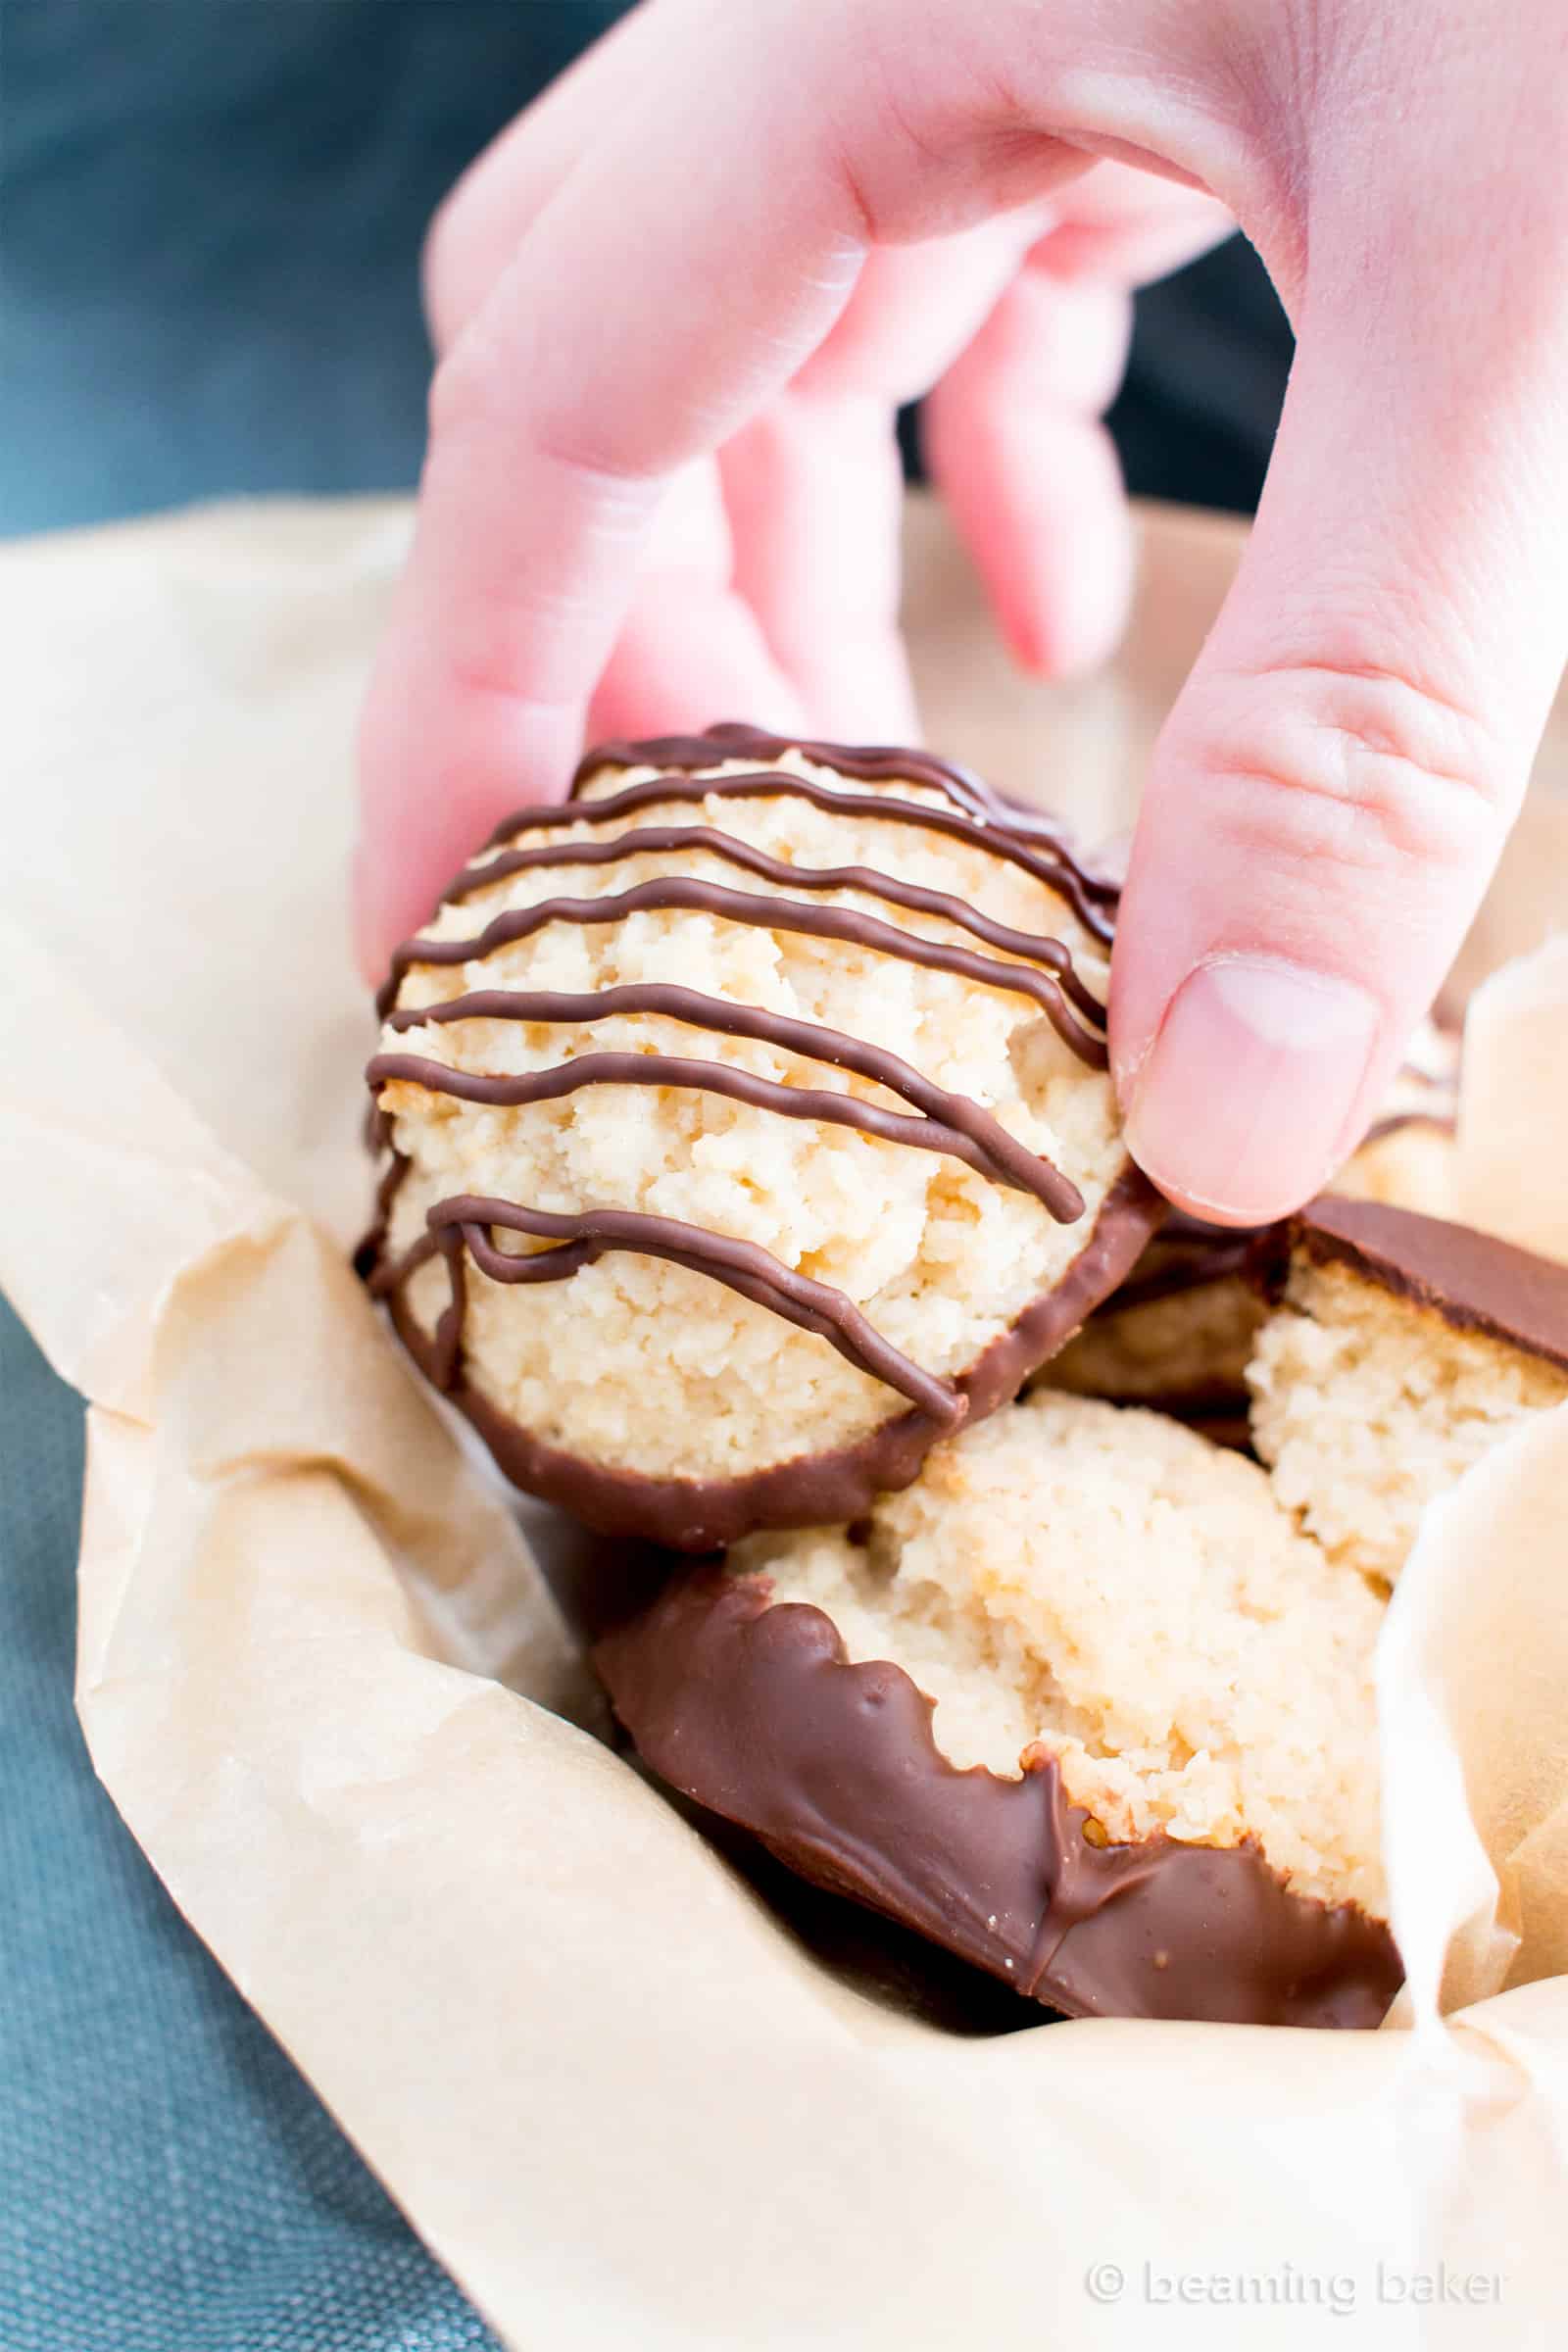 Chocolate Dipped Vegan Coconut Macaroons Recipe (V, GF): an easy recipe for chewy and satisfying chocolate-dipped coconut macaroons made with whole ingredients! #Vegan #Paleo #GlutenFree #DairyFree #Cookies #Dessert | Recipe on BeamingBaker.com